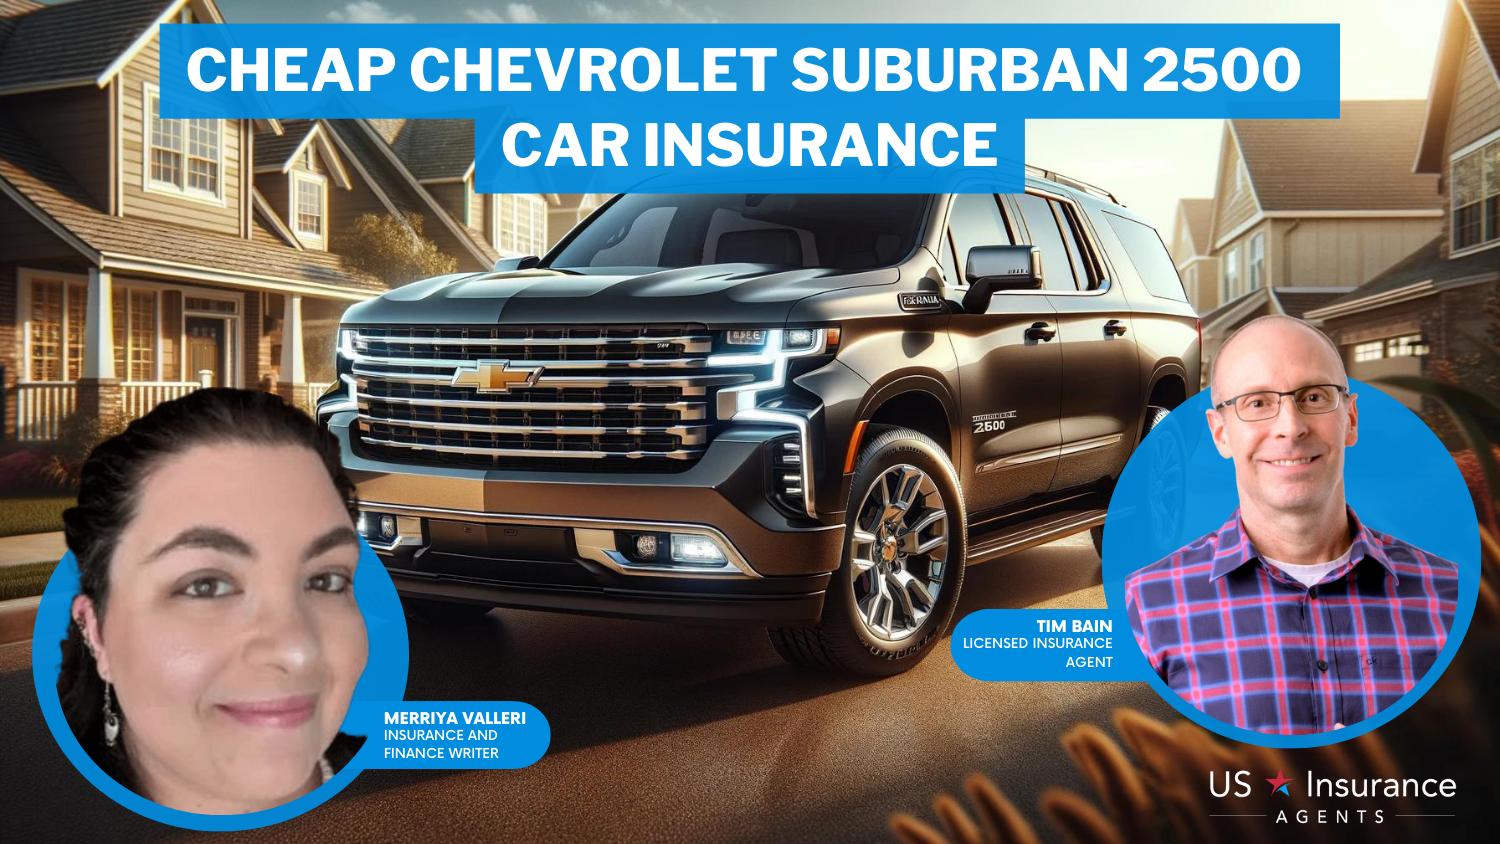 Cheap Chevrolet Suburban 2500 Car Insurance: Nationwide, Erie, and Auto-Owners